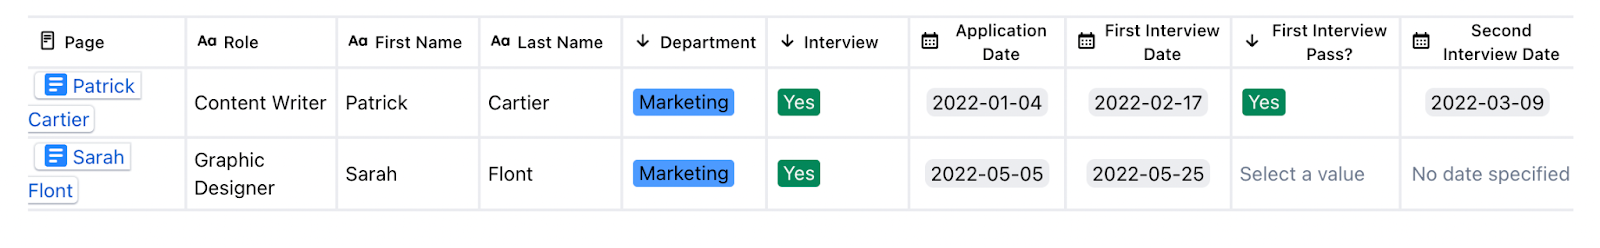 How To Organize New Job Applications in Confluence Cloud - property group report filtered by label